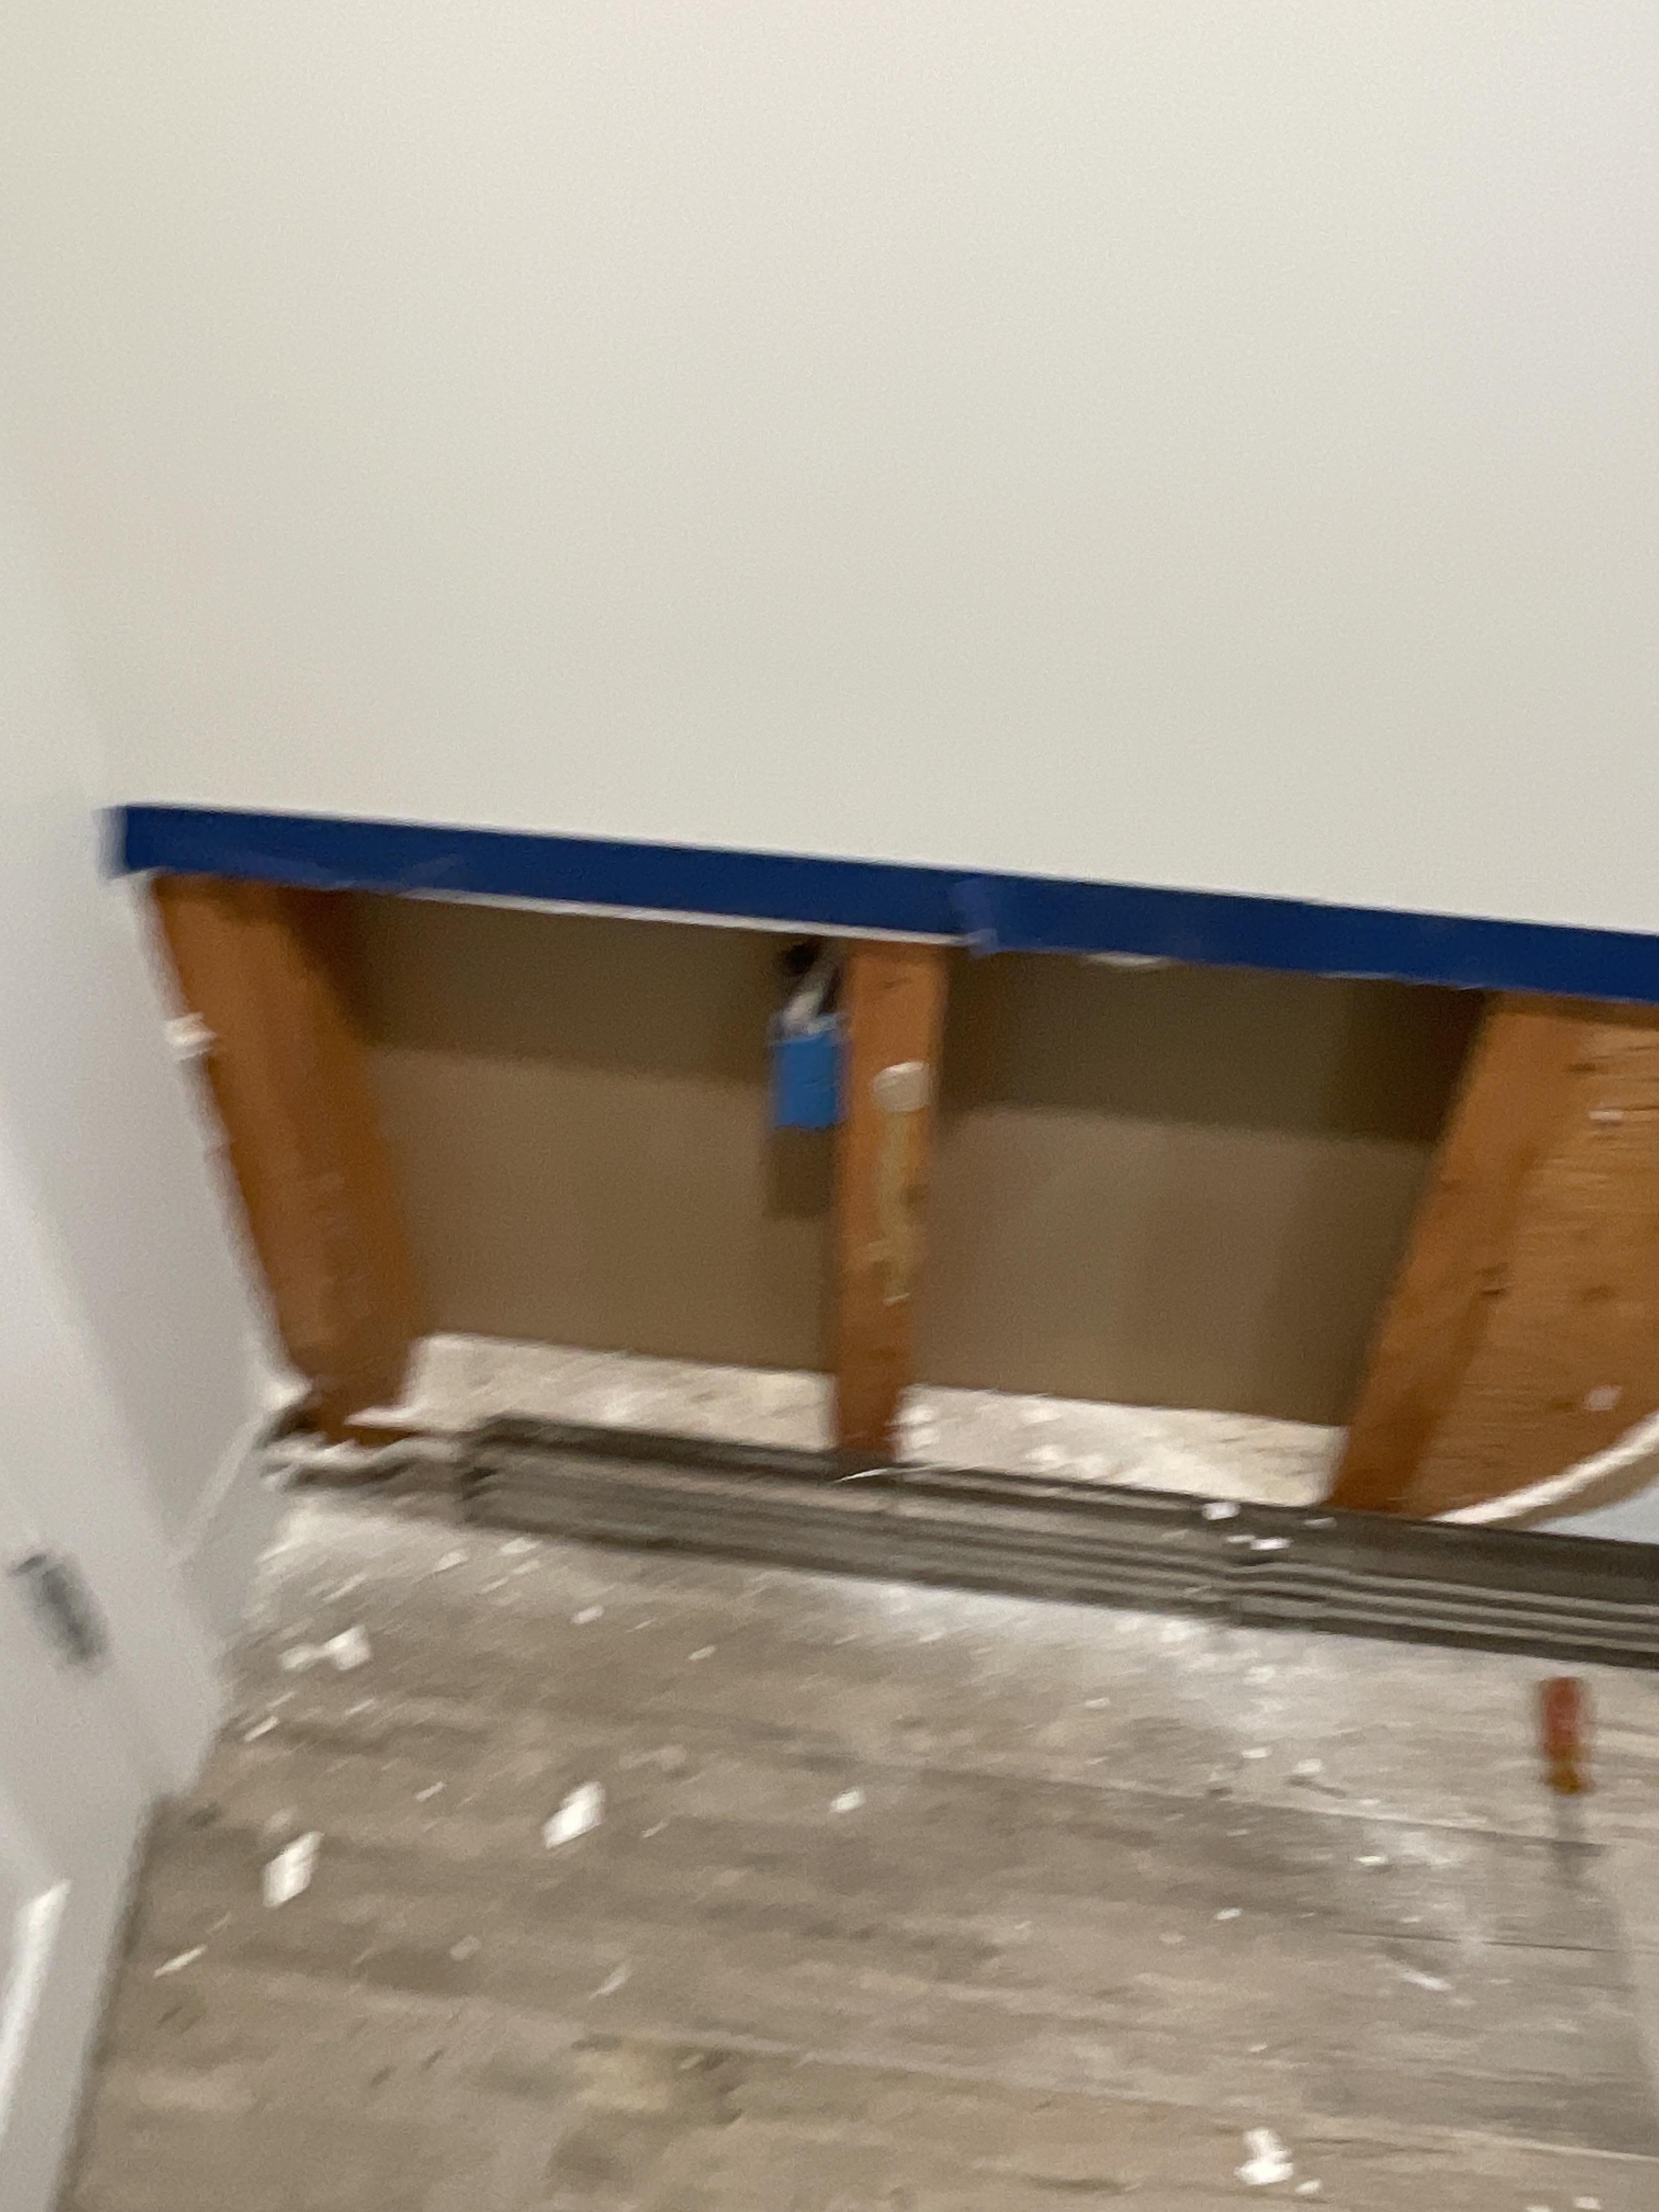 Removing Wet Wall in Bathroom